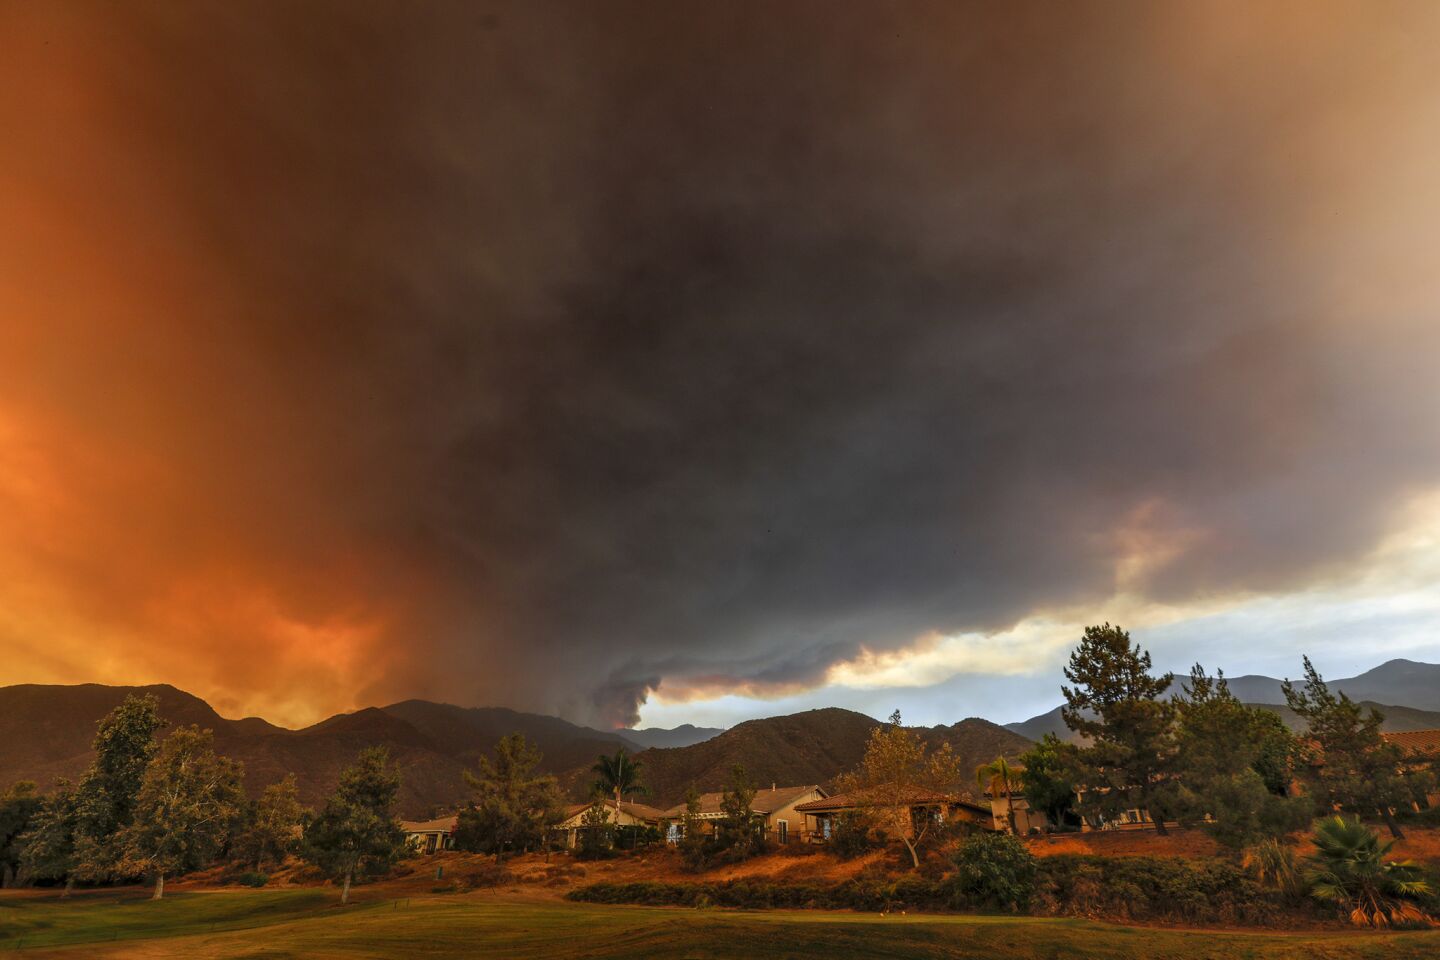 Smoke from the Holy fire darkens the sky over the Glen Ivy Golf Club as the blaze burns on the mountain ridges around Corona.